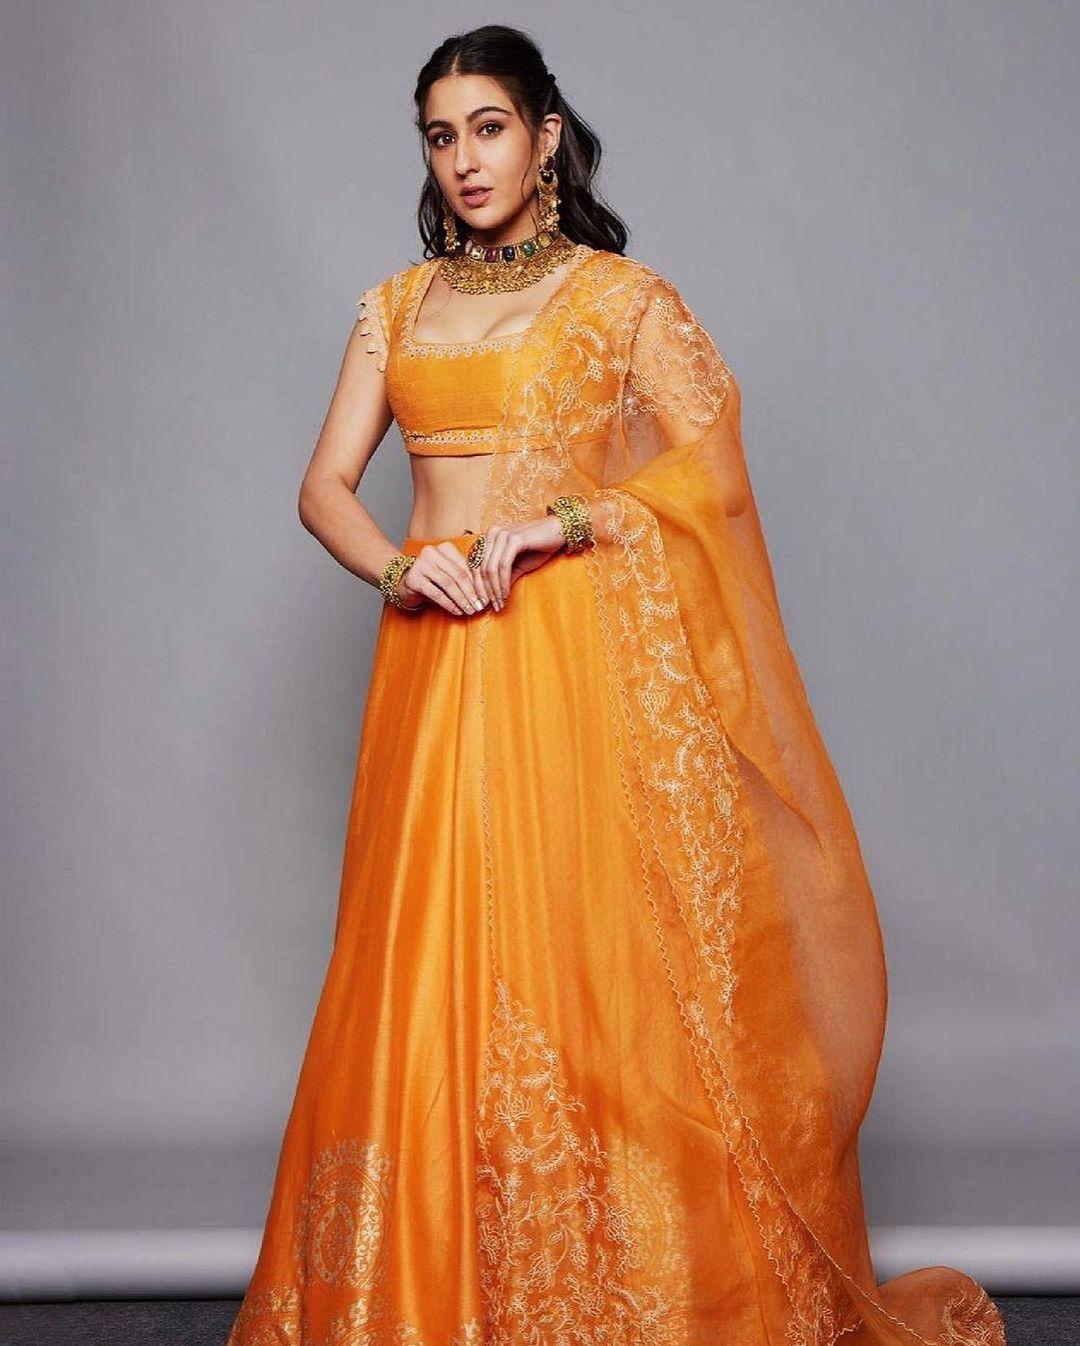 This lovely orange lehenga set is a true work of art. The skirt is crafted from delicate chanderi fabric and adorned with intricate hand block prints.